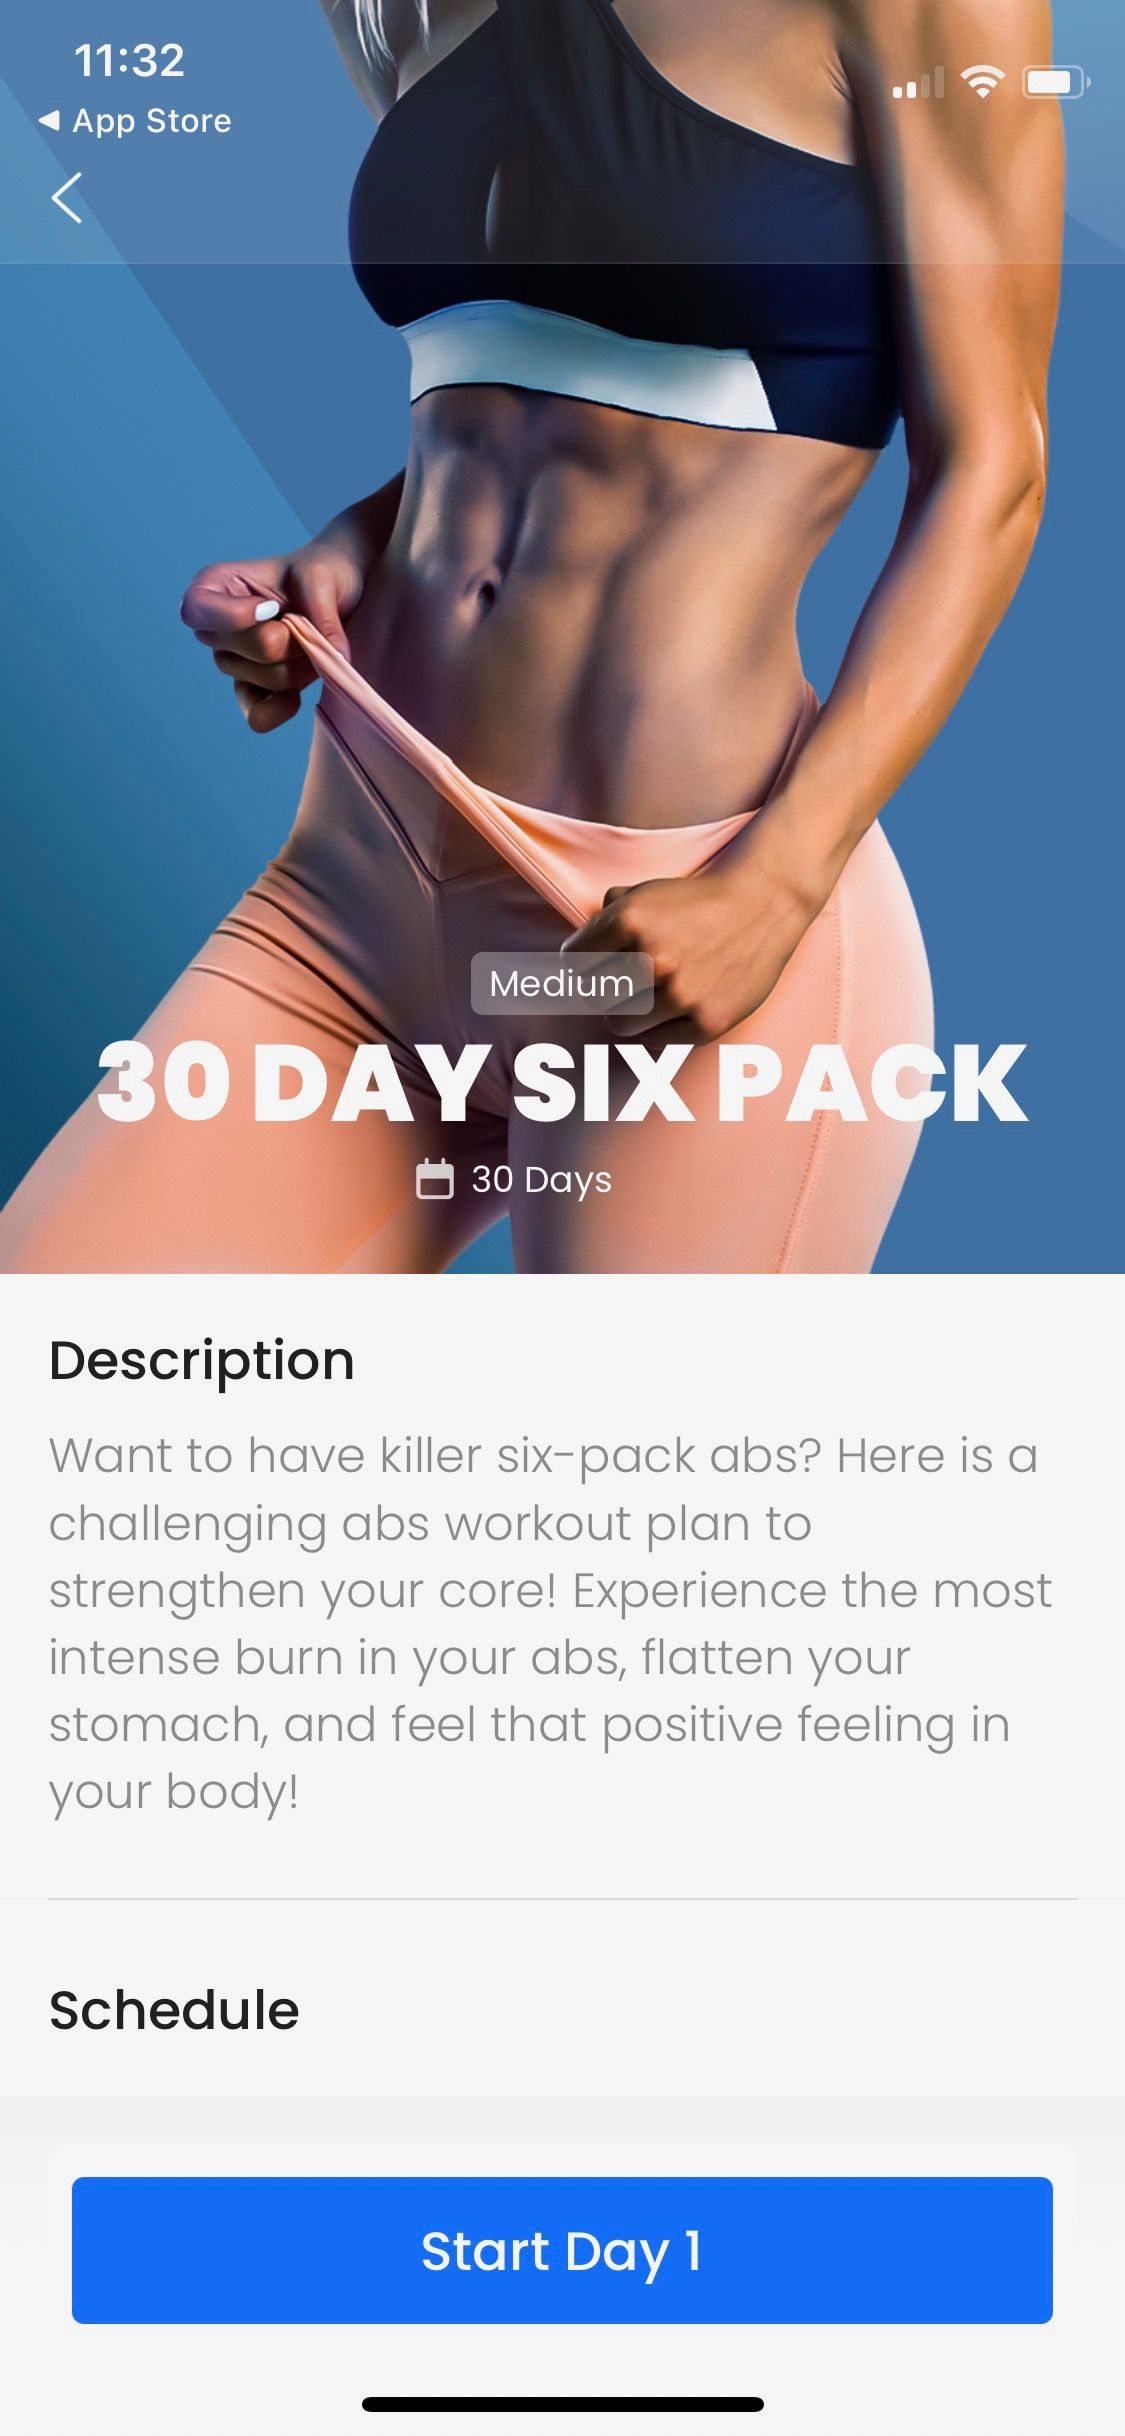 Screenshot of 7M app showing 30 day 6 pack introduction